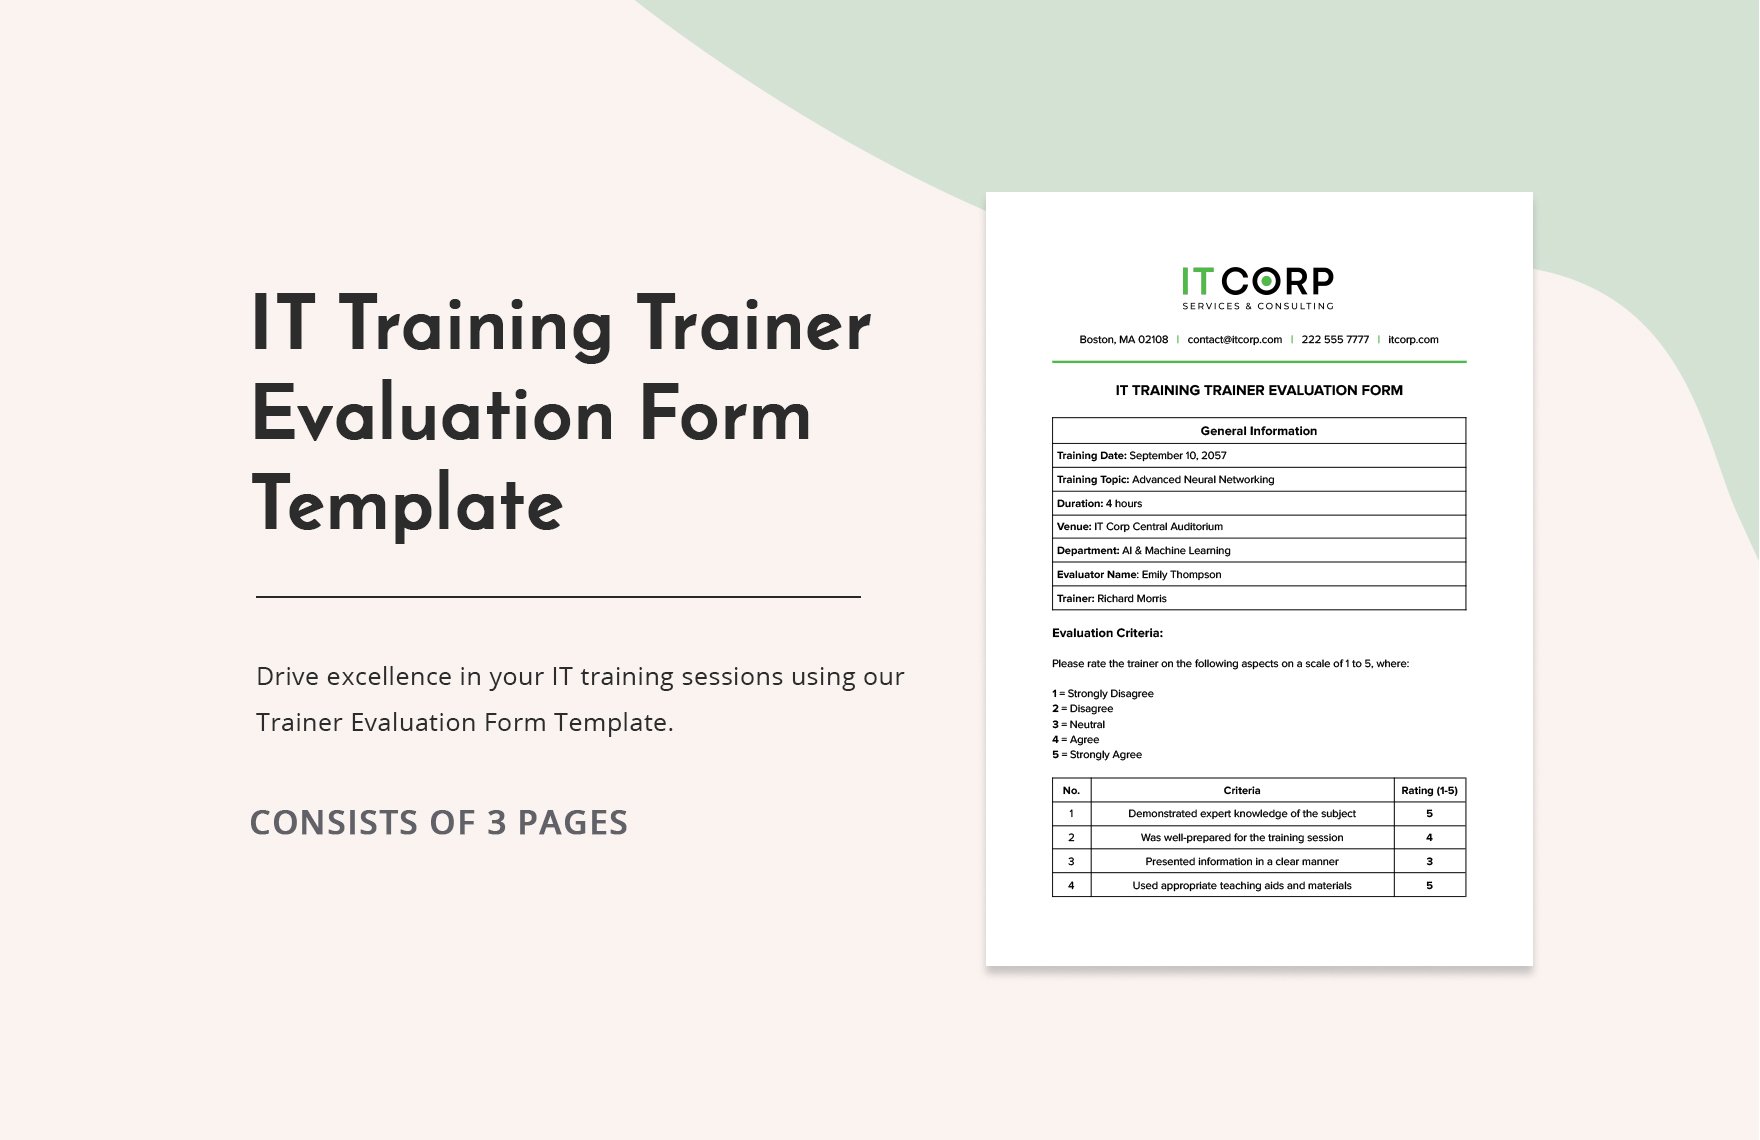 IT Training Trainer Evaluation Form Template